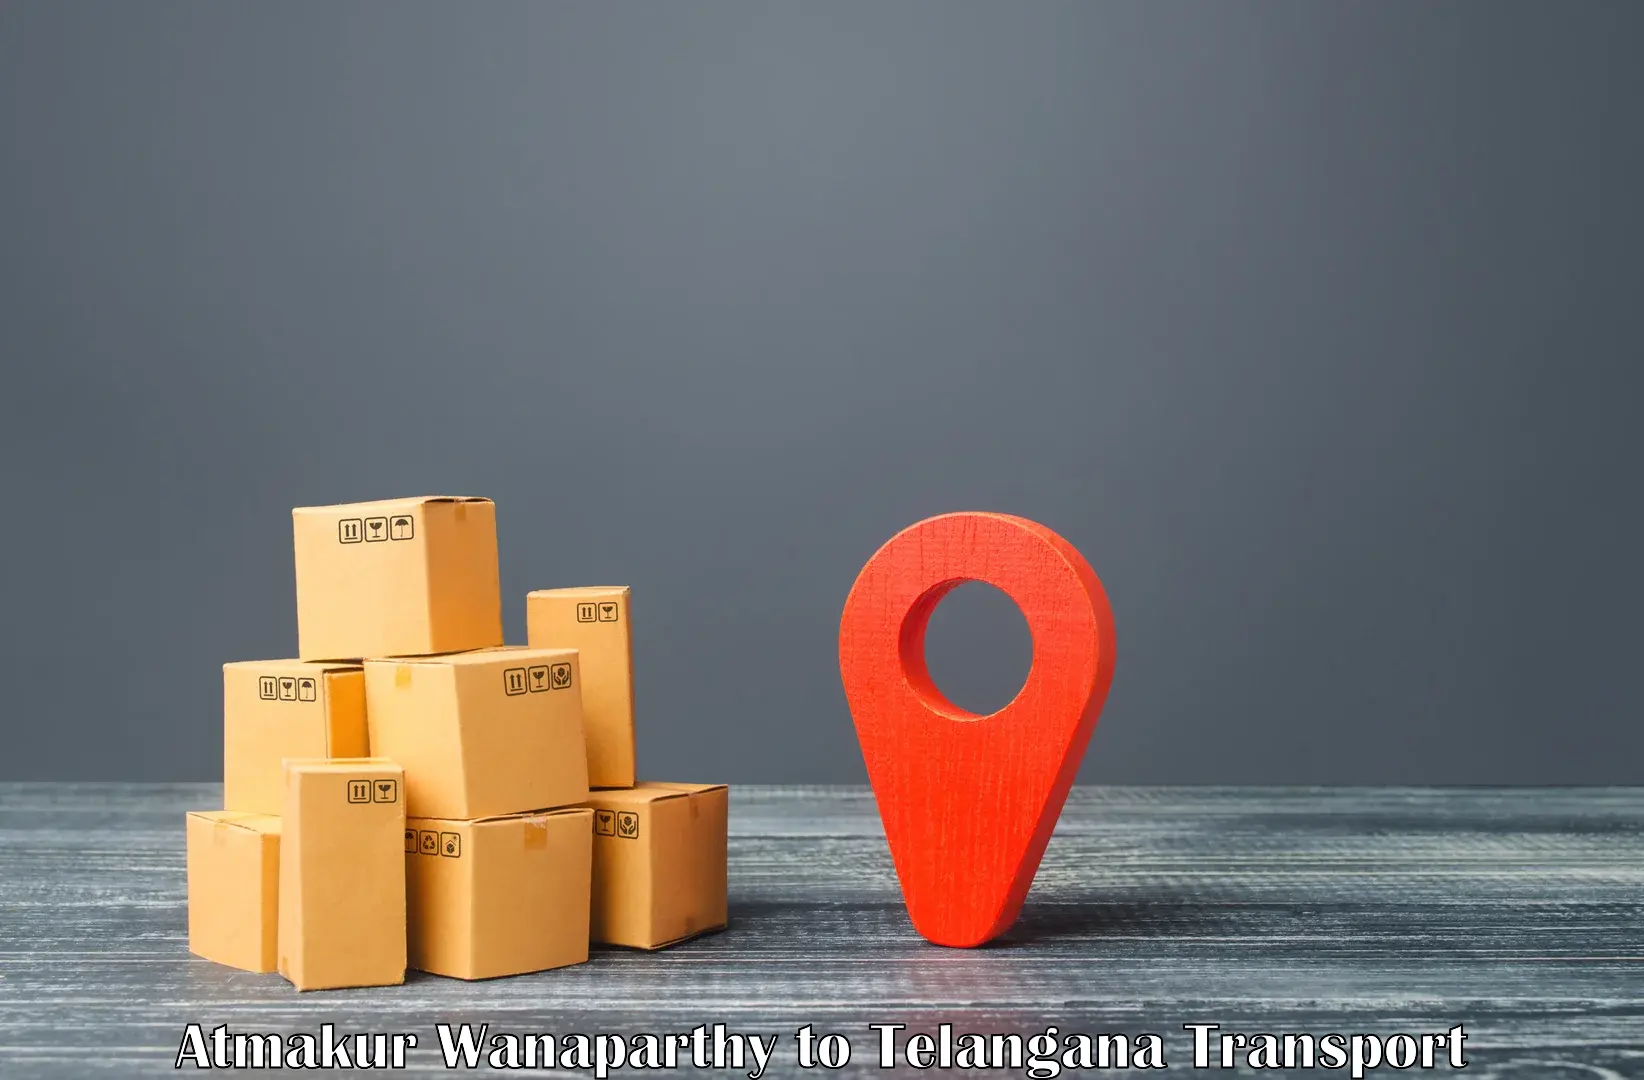 Shipping services in Atmakur Wanaparthy to Moinabad